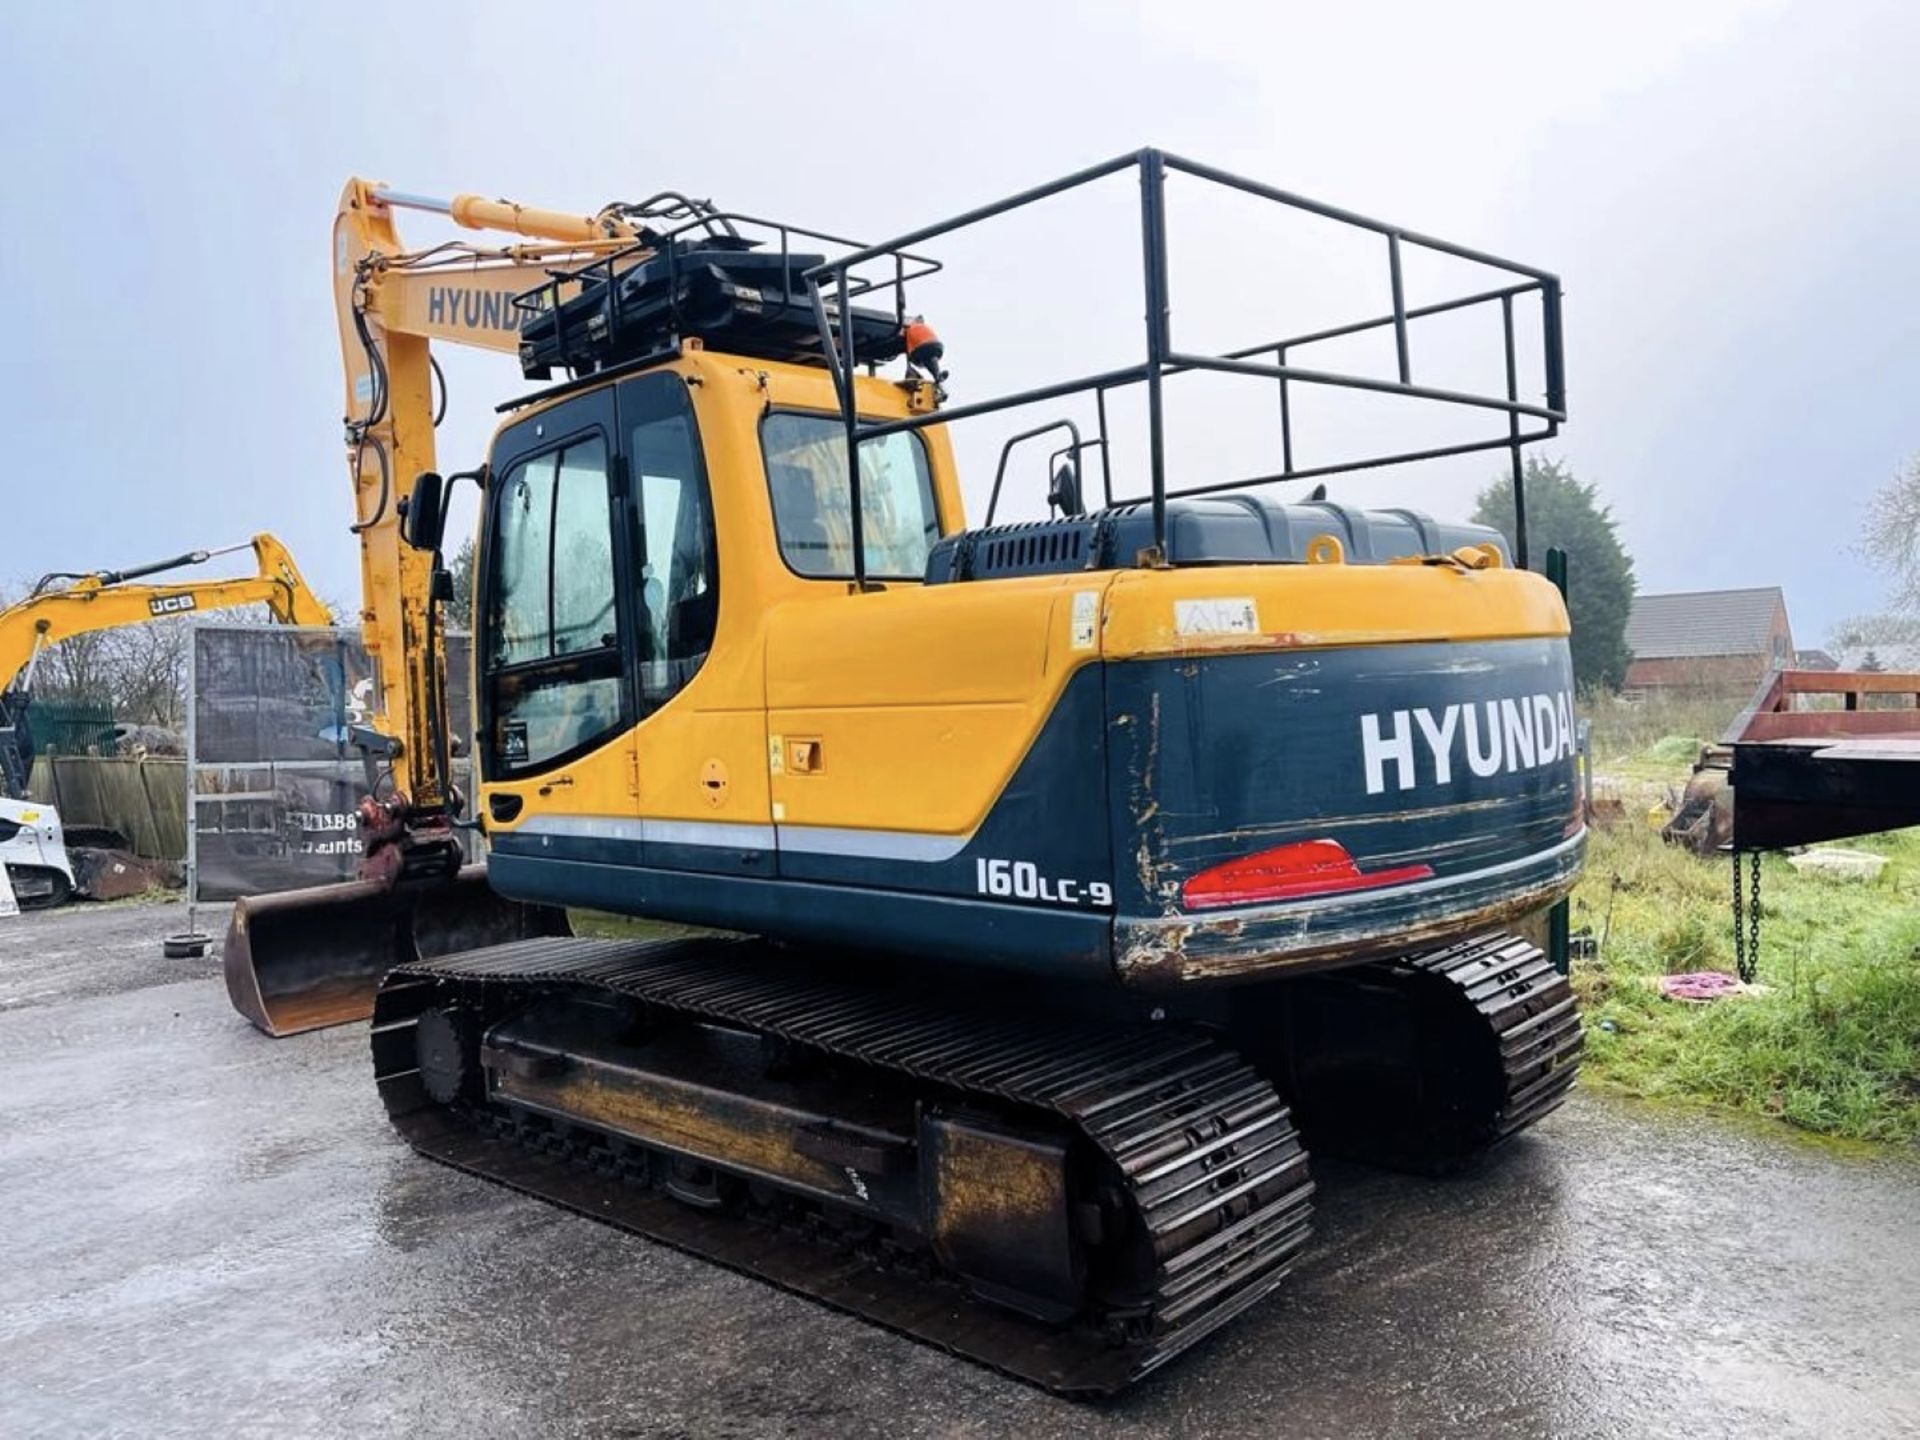 2013, HYUNDAI R160 LC-9 EXCAVATORHYUNDAI R160 LC-9 EXCAVATOR - Image 10 of 16